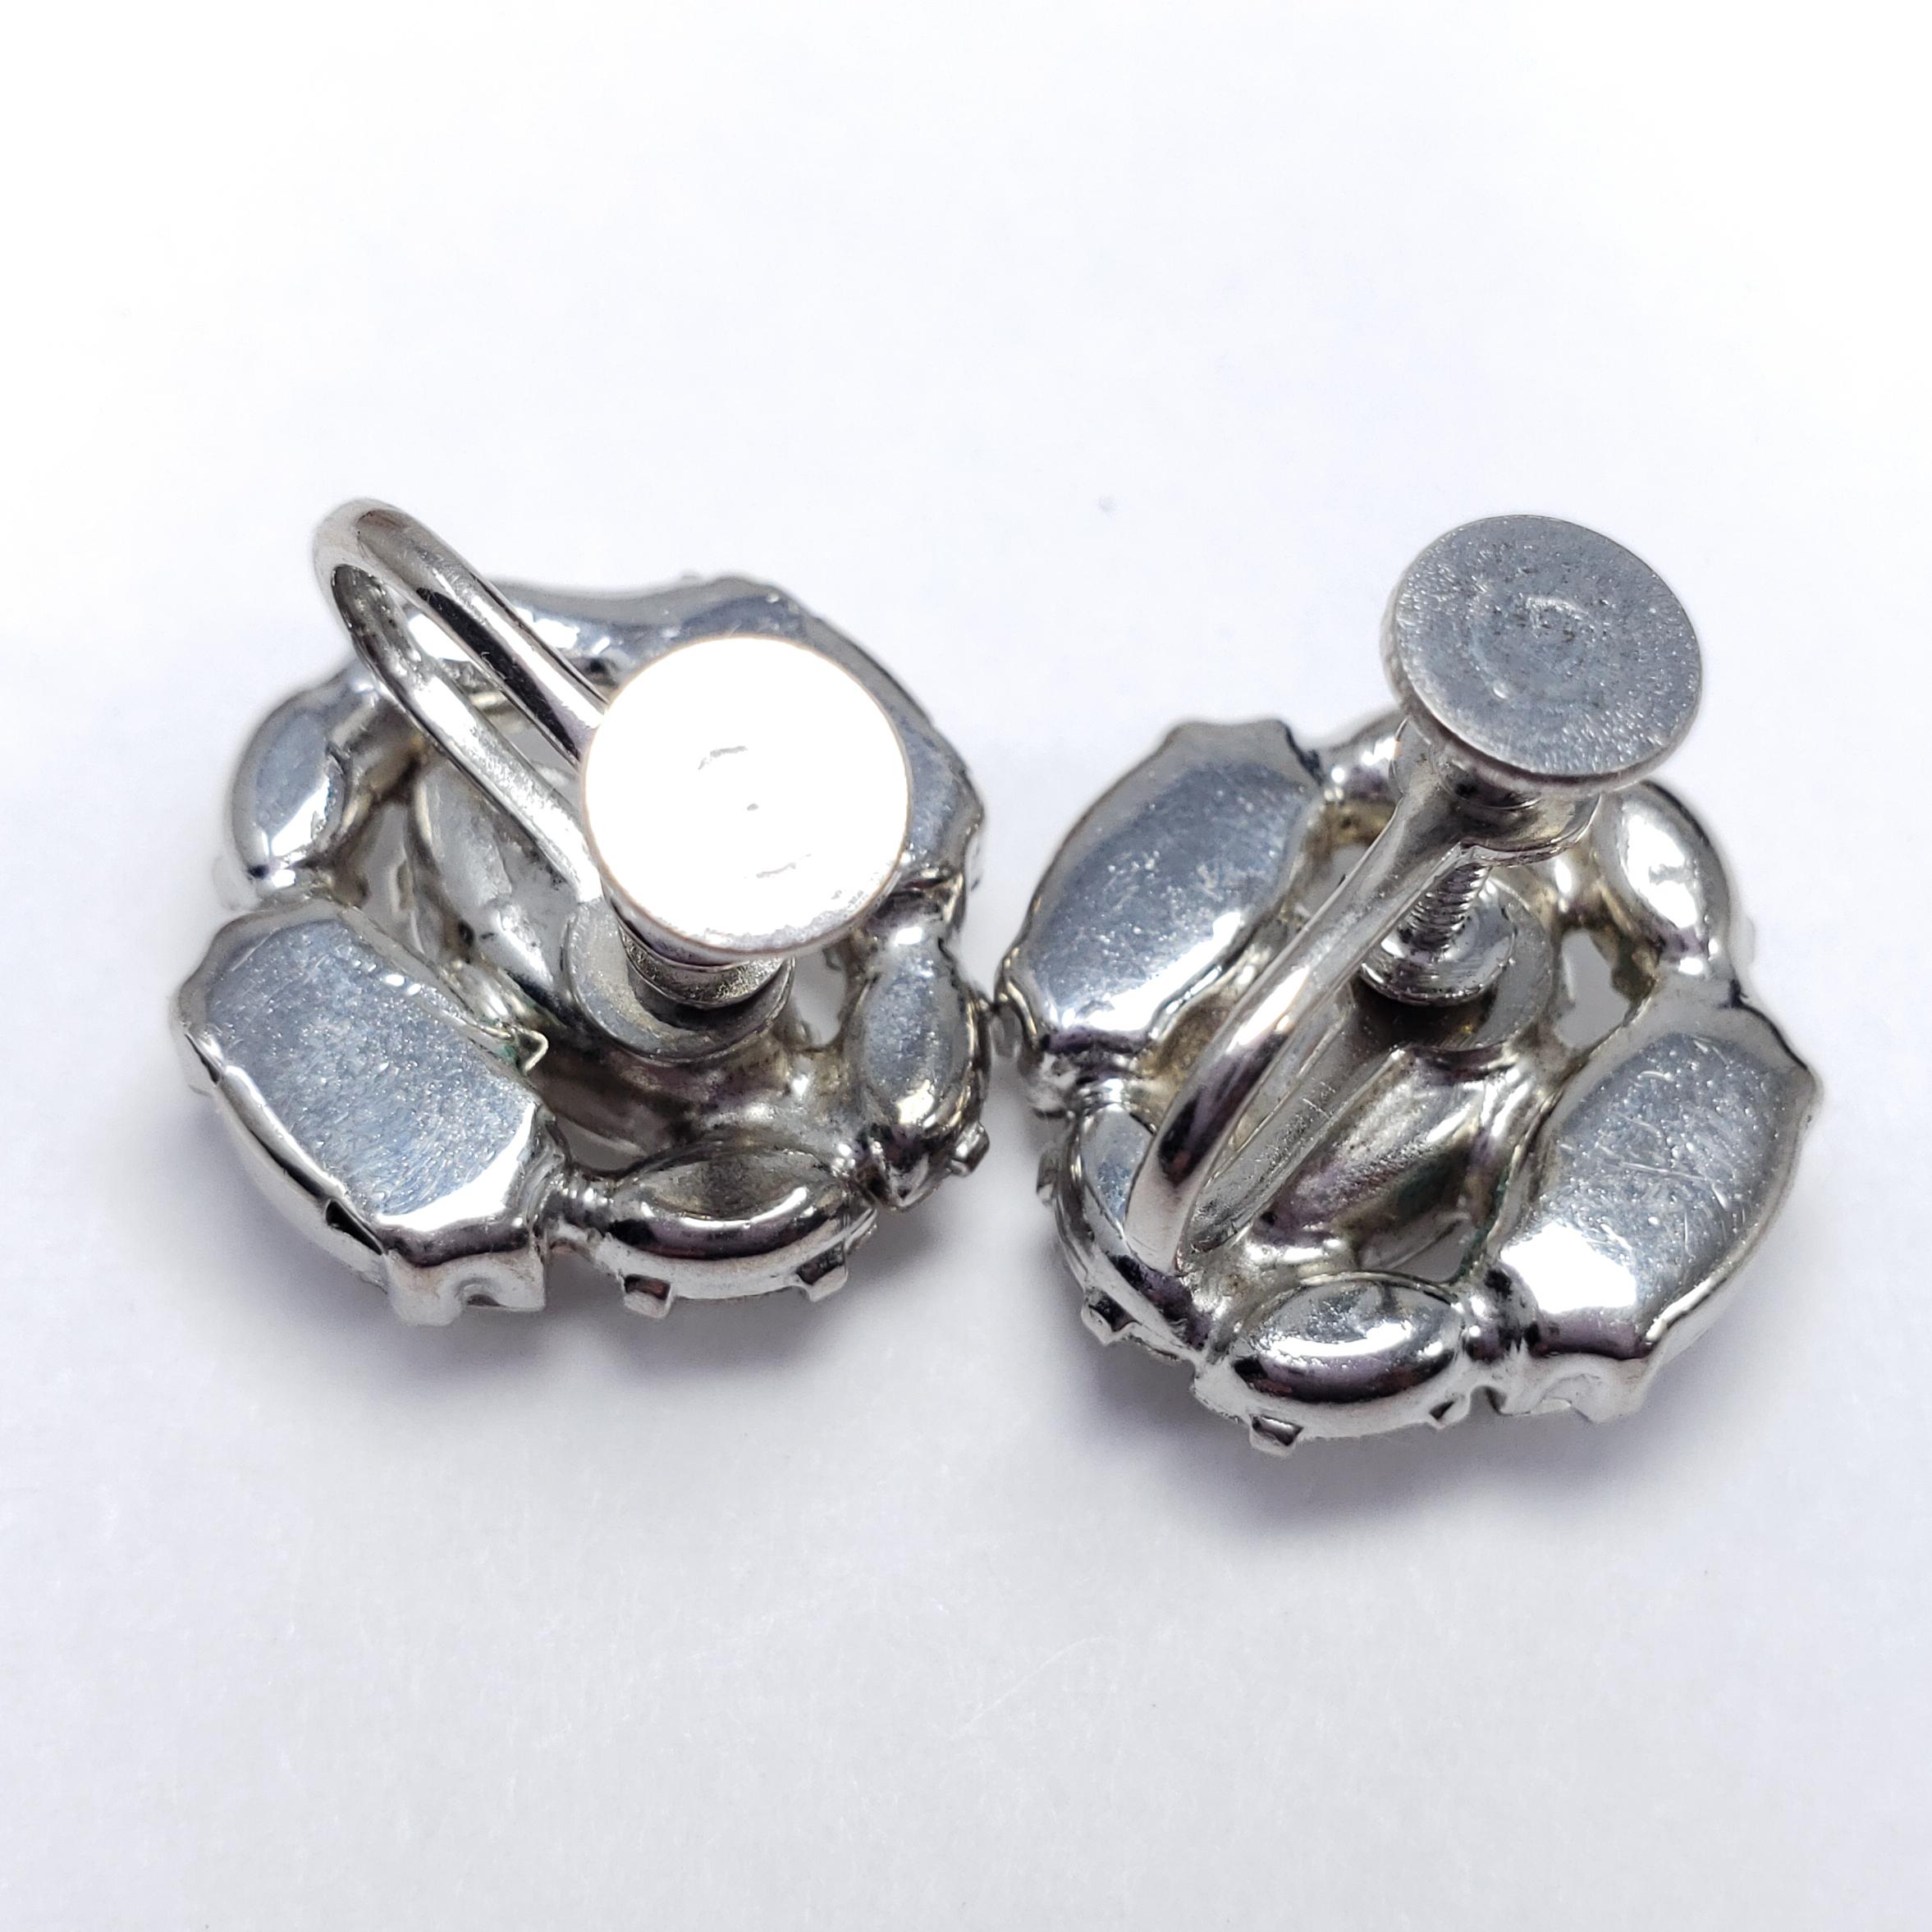 Clear Crystal Cluster Earrings in Silver, Mid 1900s, Prong Set, Screw Back Hardw In Good Condition For Sale In Milford, DE